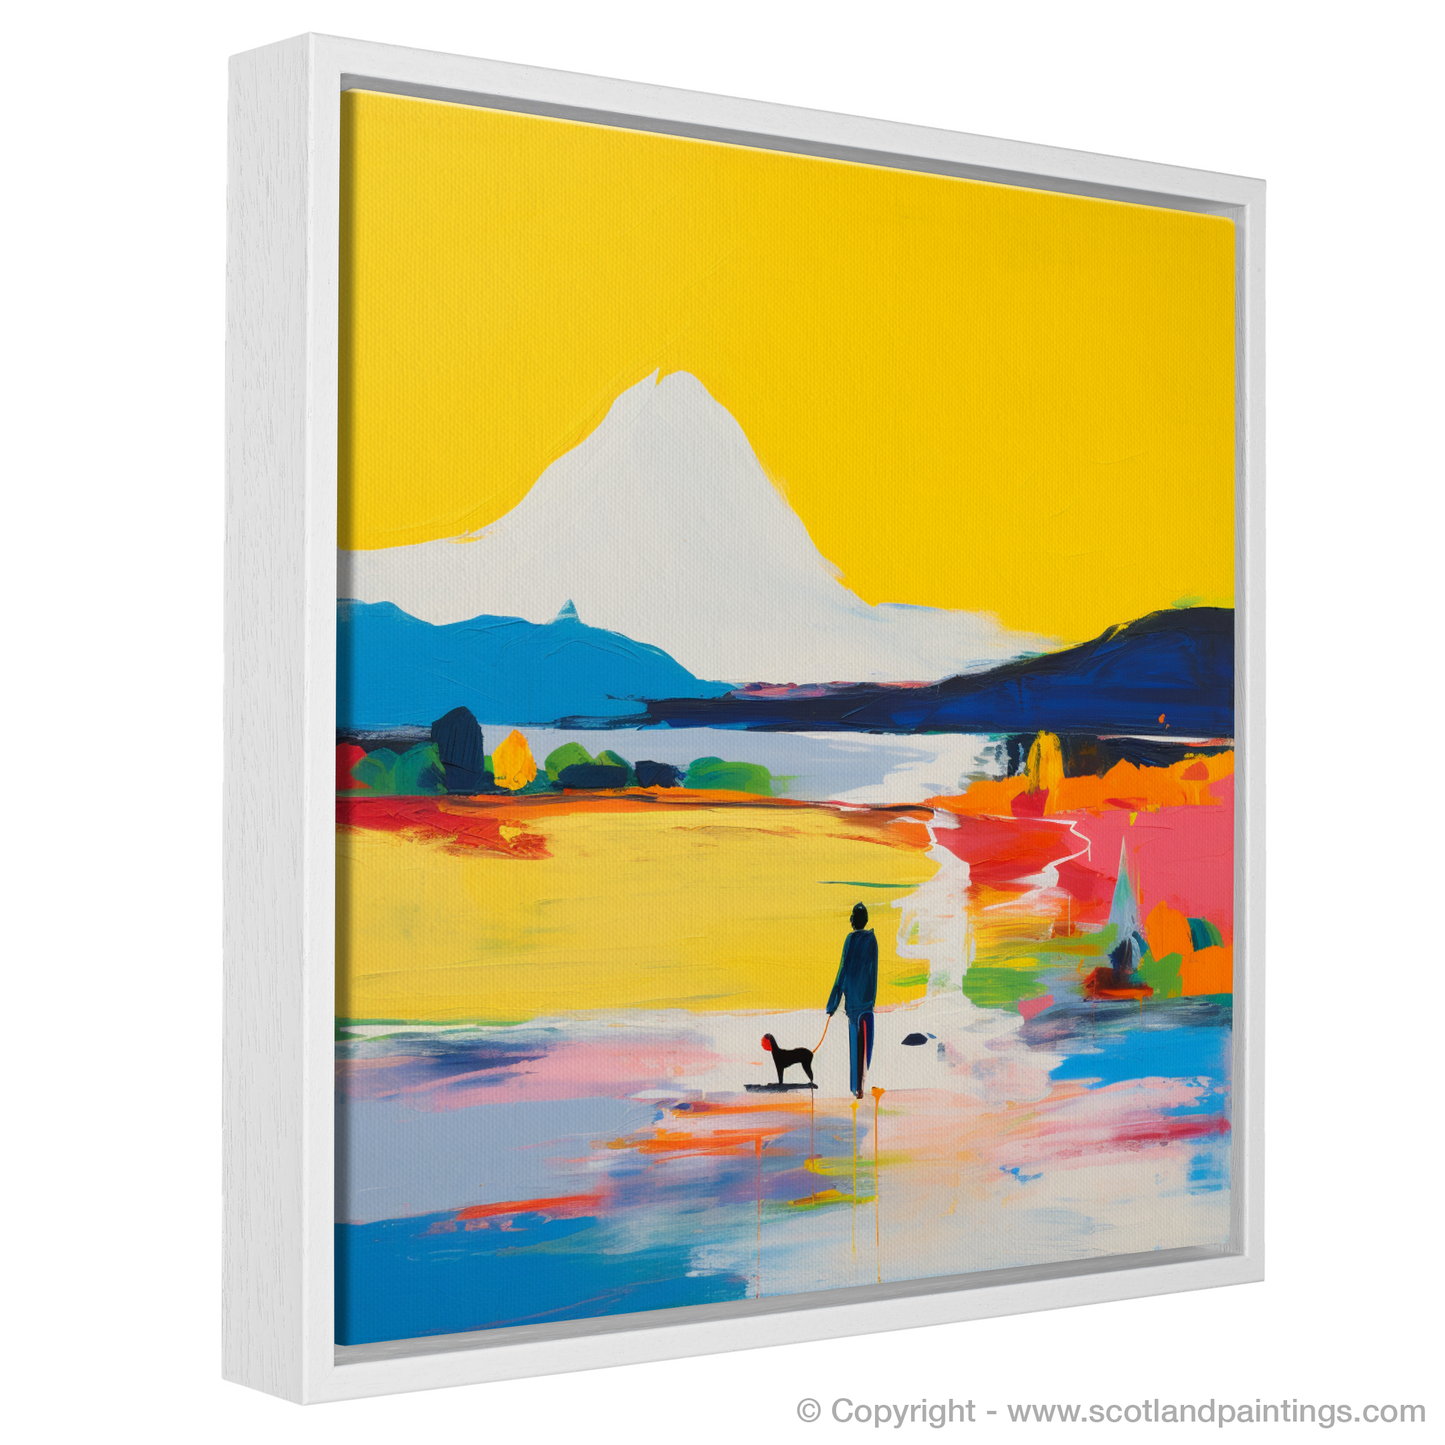 Painting and Art Print of A man walking dog at the side of Loch Lomond entitled "Loch Lomond Twilight: An Abstract Reverie".